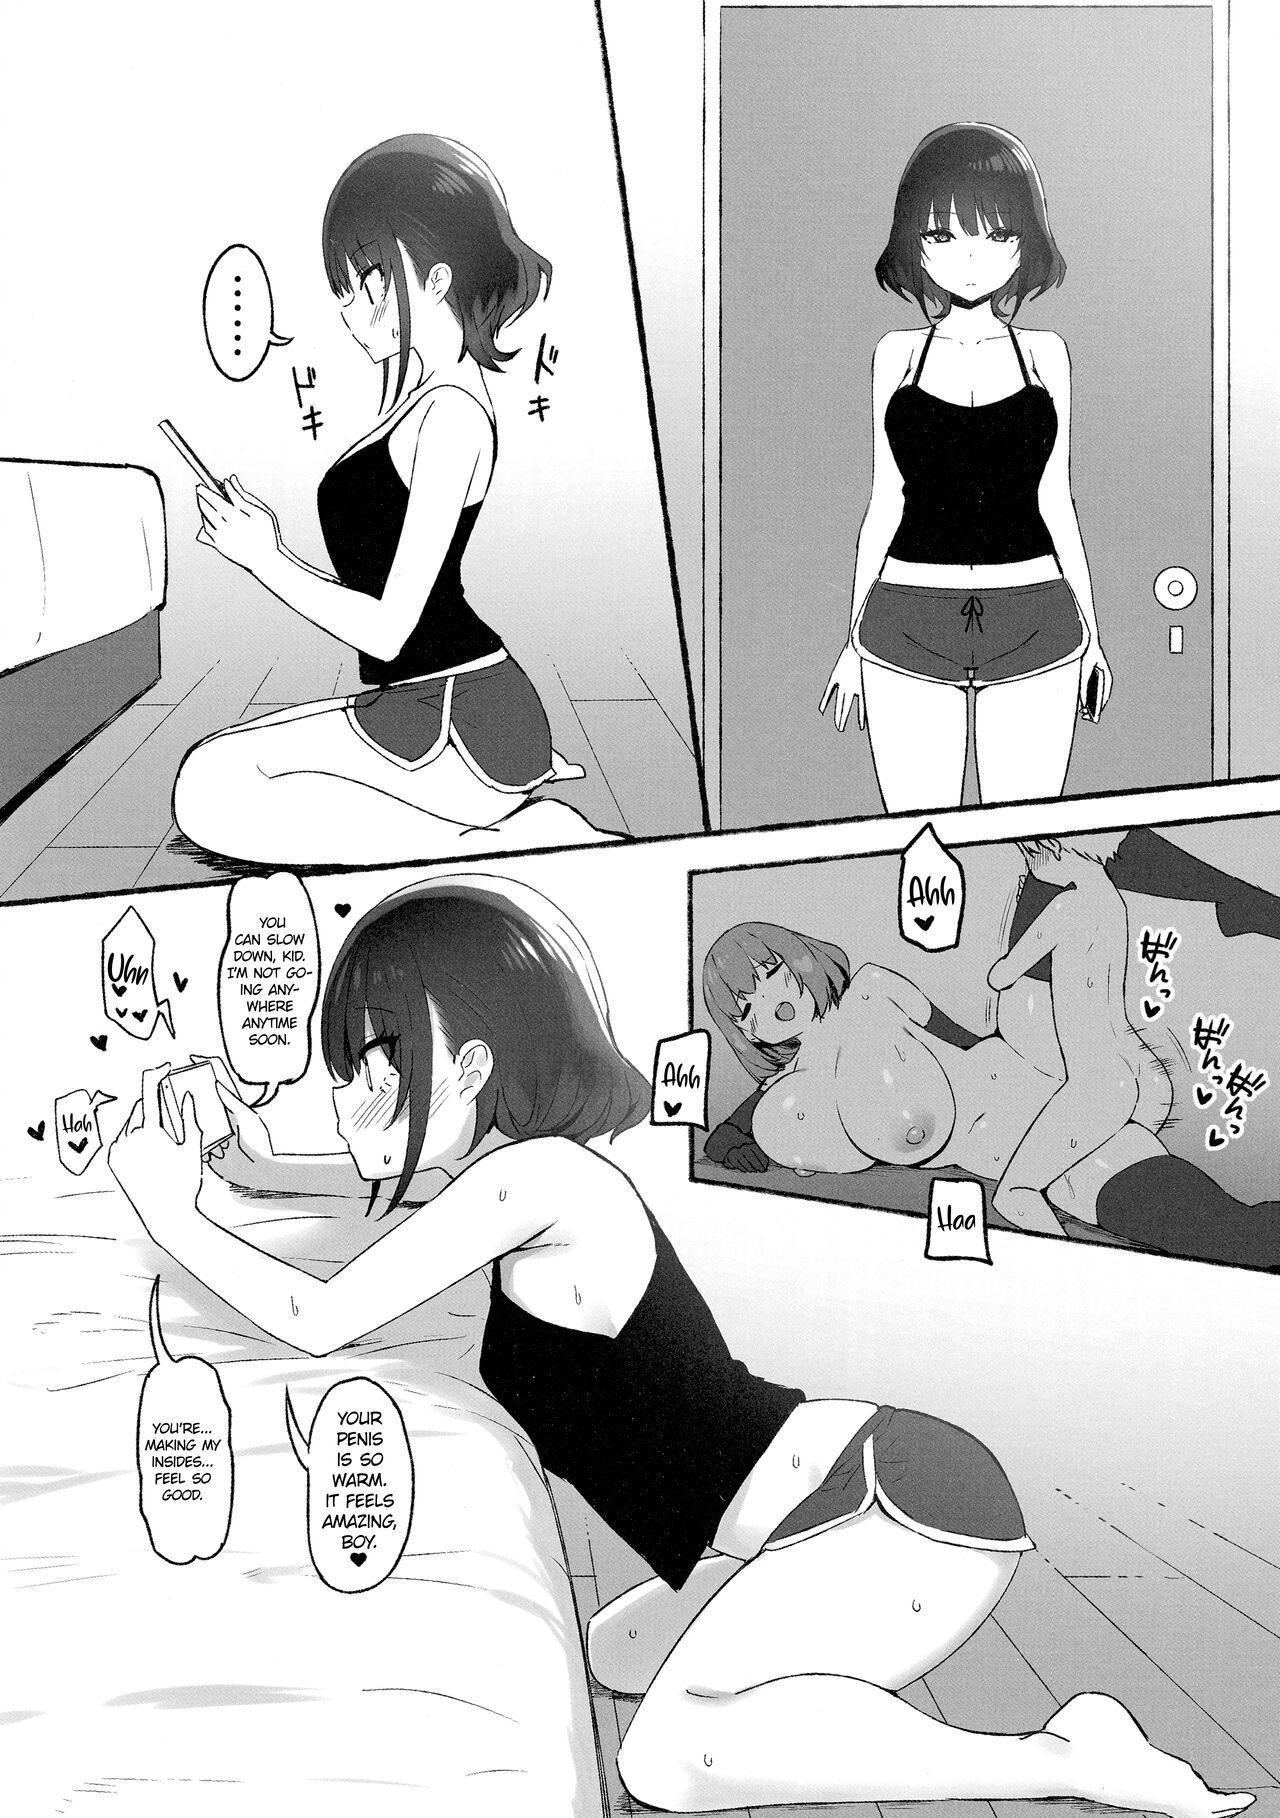 Suck Cock [Candy Club (Sky)] Onee-chan to Torokeru Kimochi SP | The Melting Feeling with Onee-chan SP [English] [CHLOEVEIL] - Original Exhibitionist - Page 4